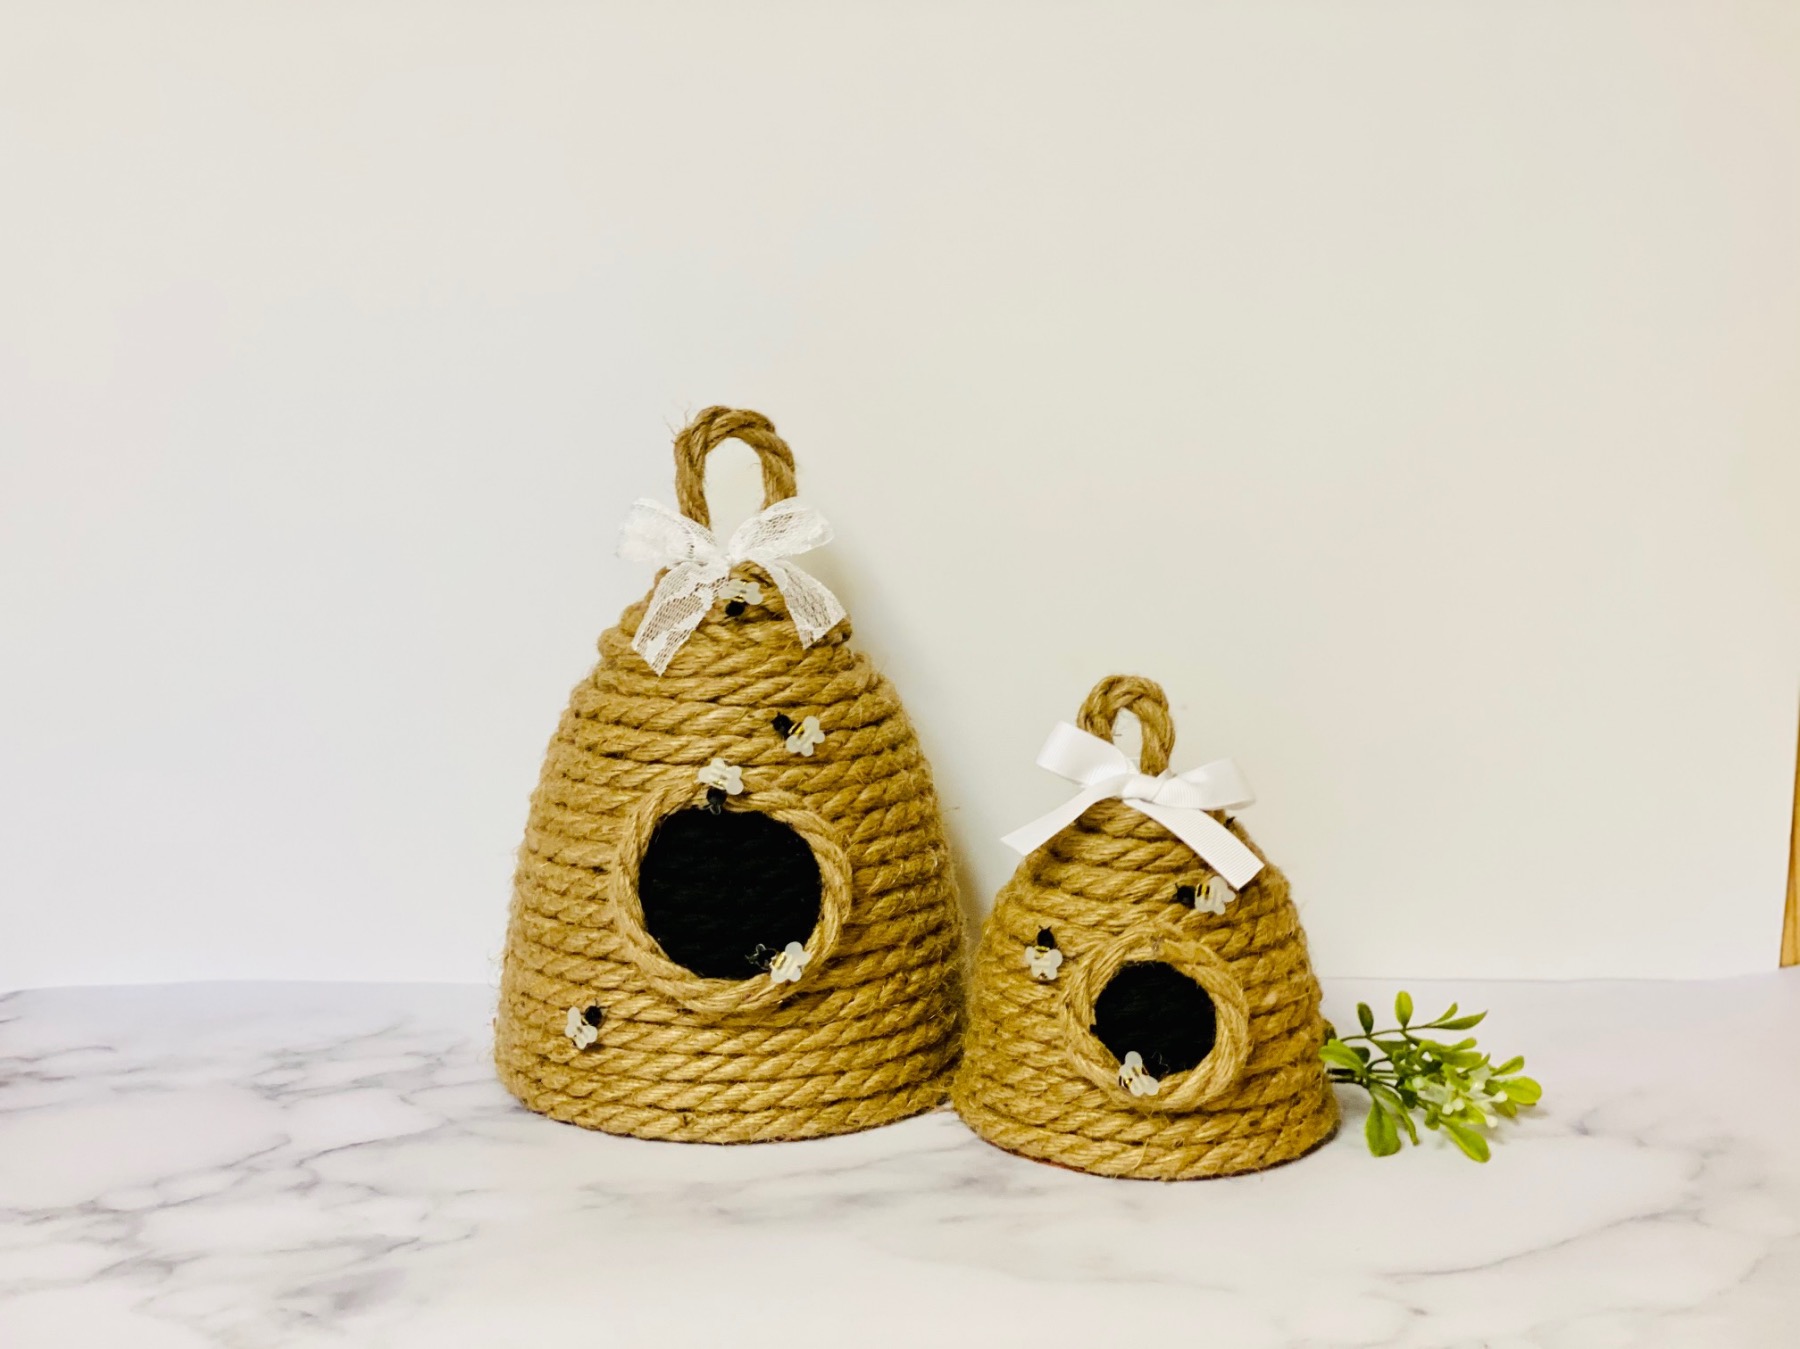 finished rope beehive craft tutorial pop shop america